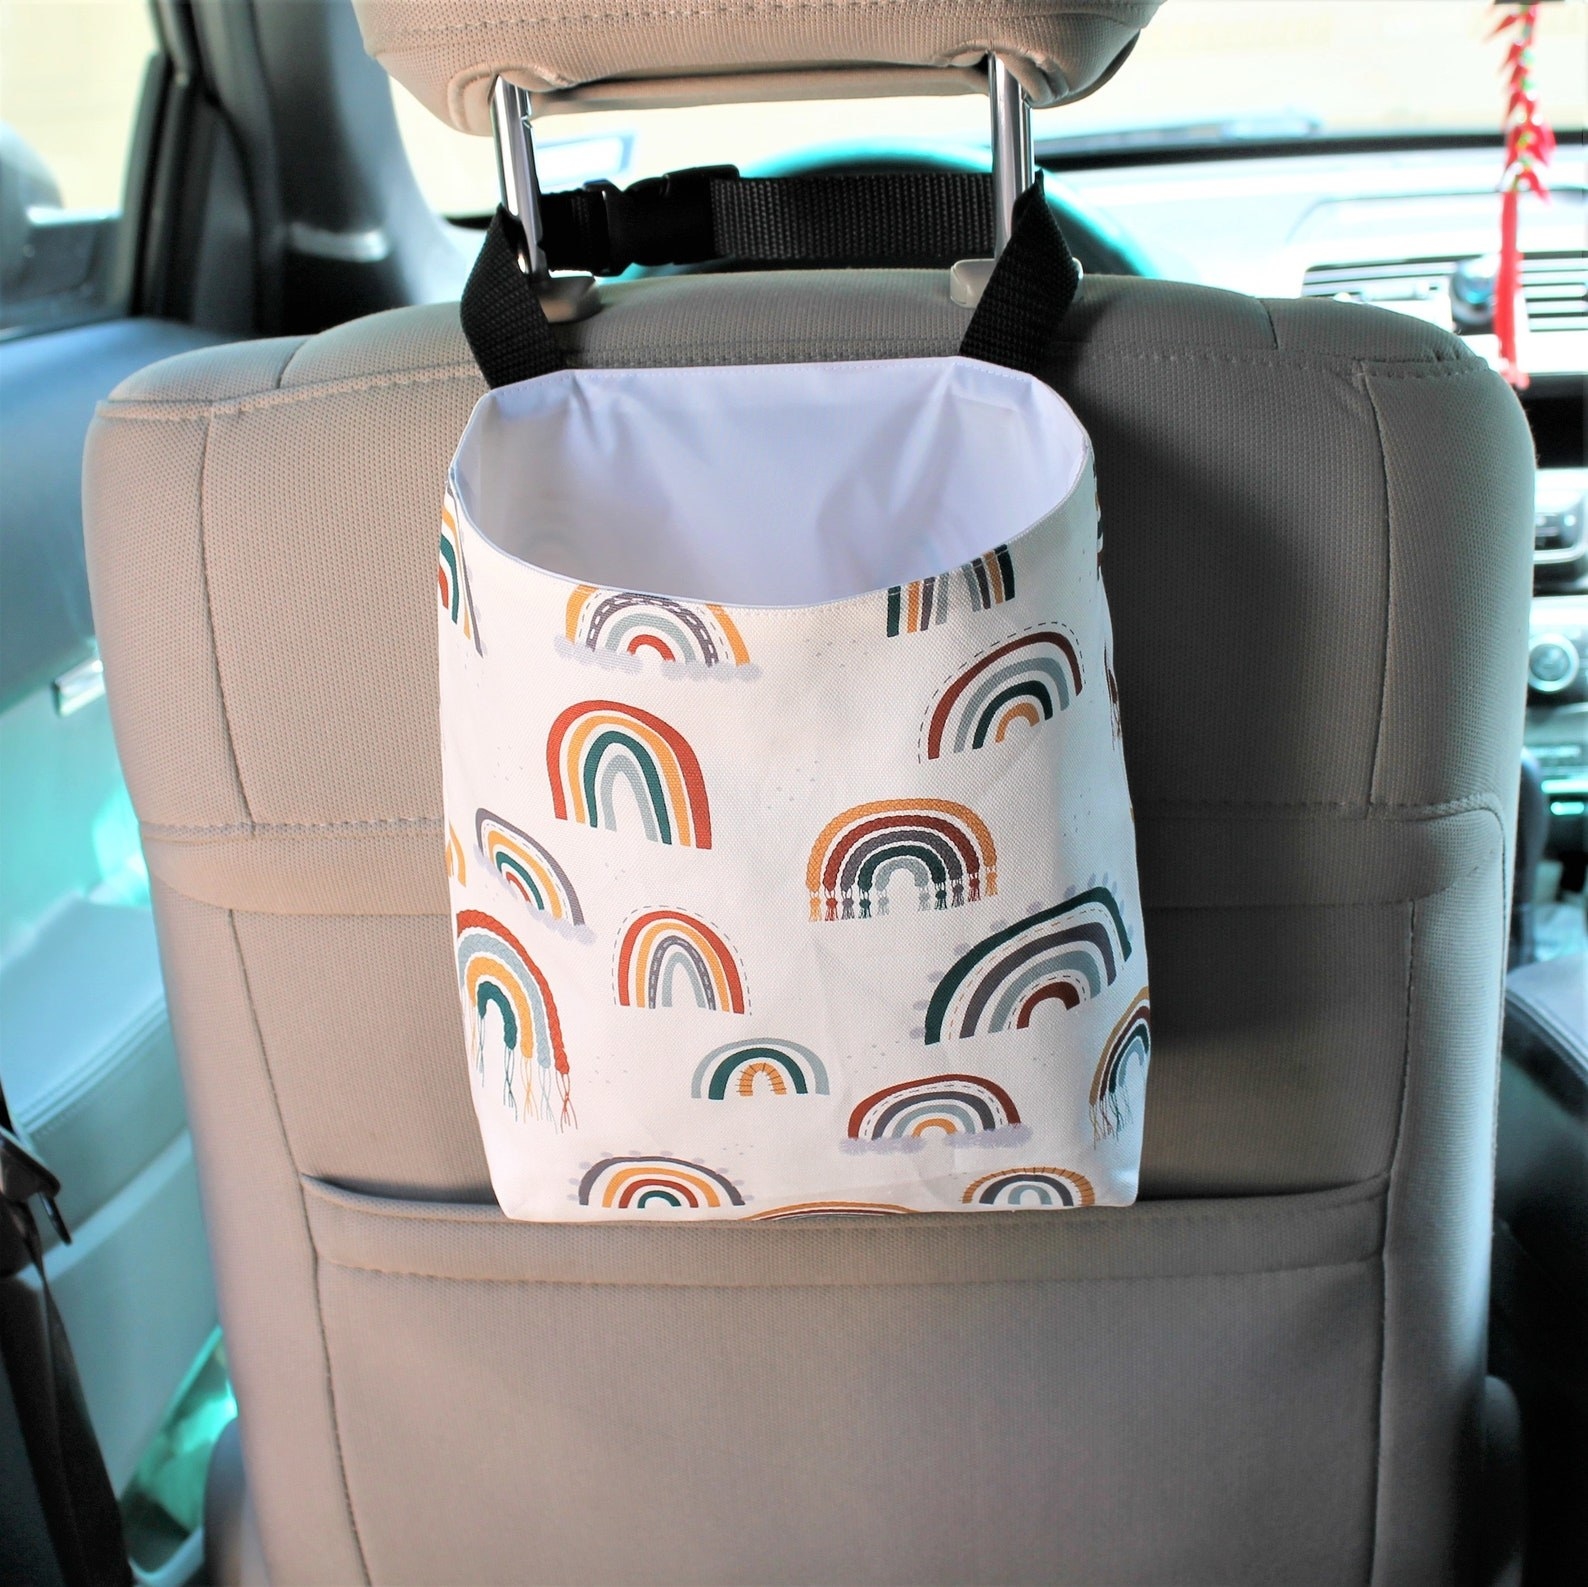 The trash can hooked behind the passenger seat with a boho rainbow pattern on it